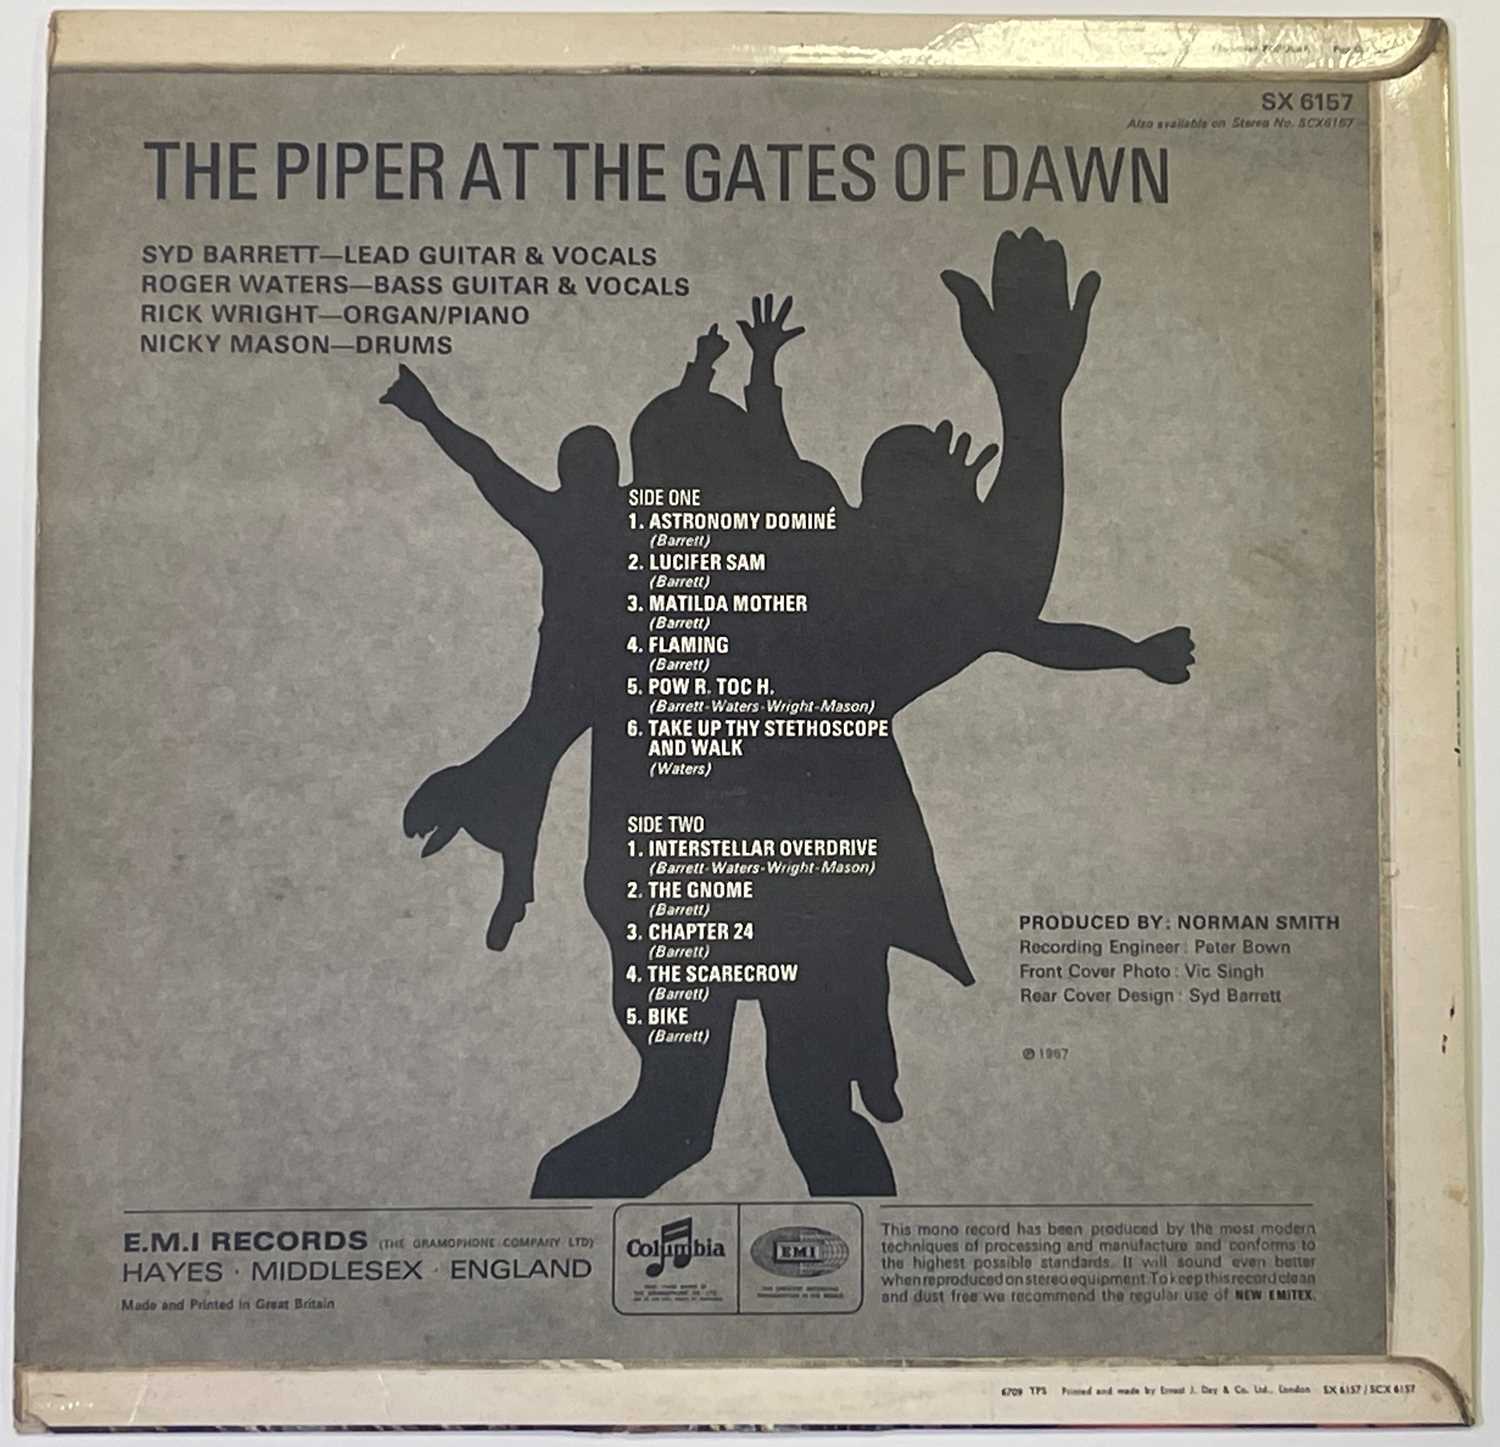 PINK FLOYD - THE PIPER AT THE GATES OF DAWN LP (ORIGINAL UK MONO COPY - COLUMBIA SX 6517) - Image 3 of 3